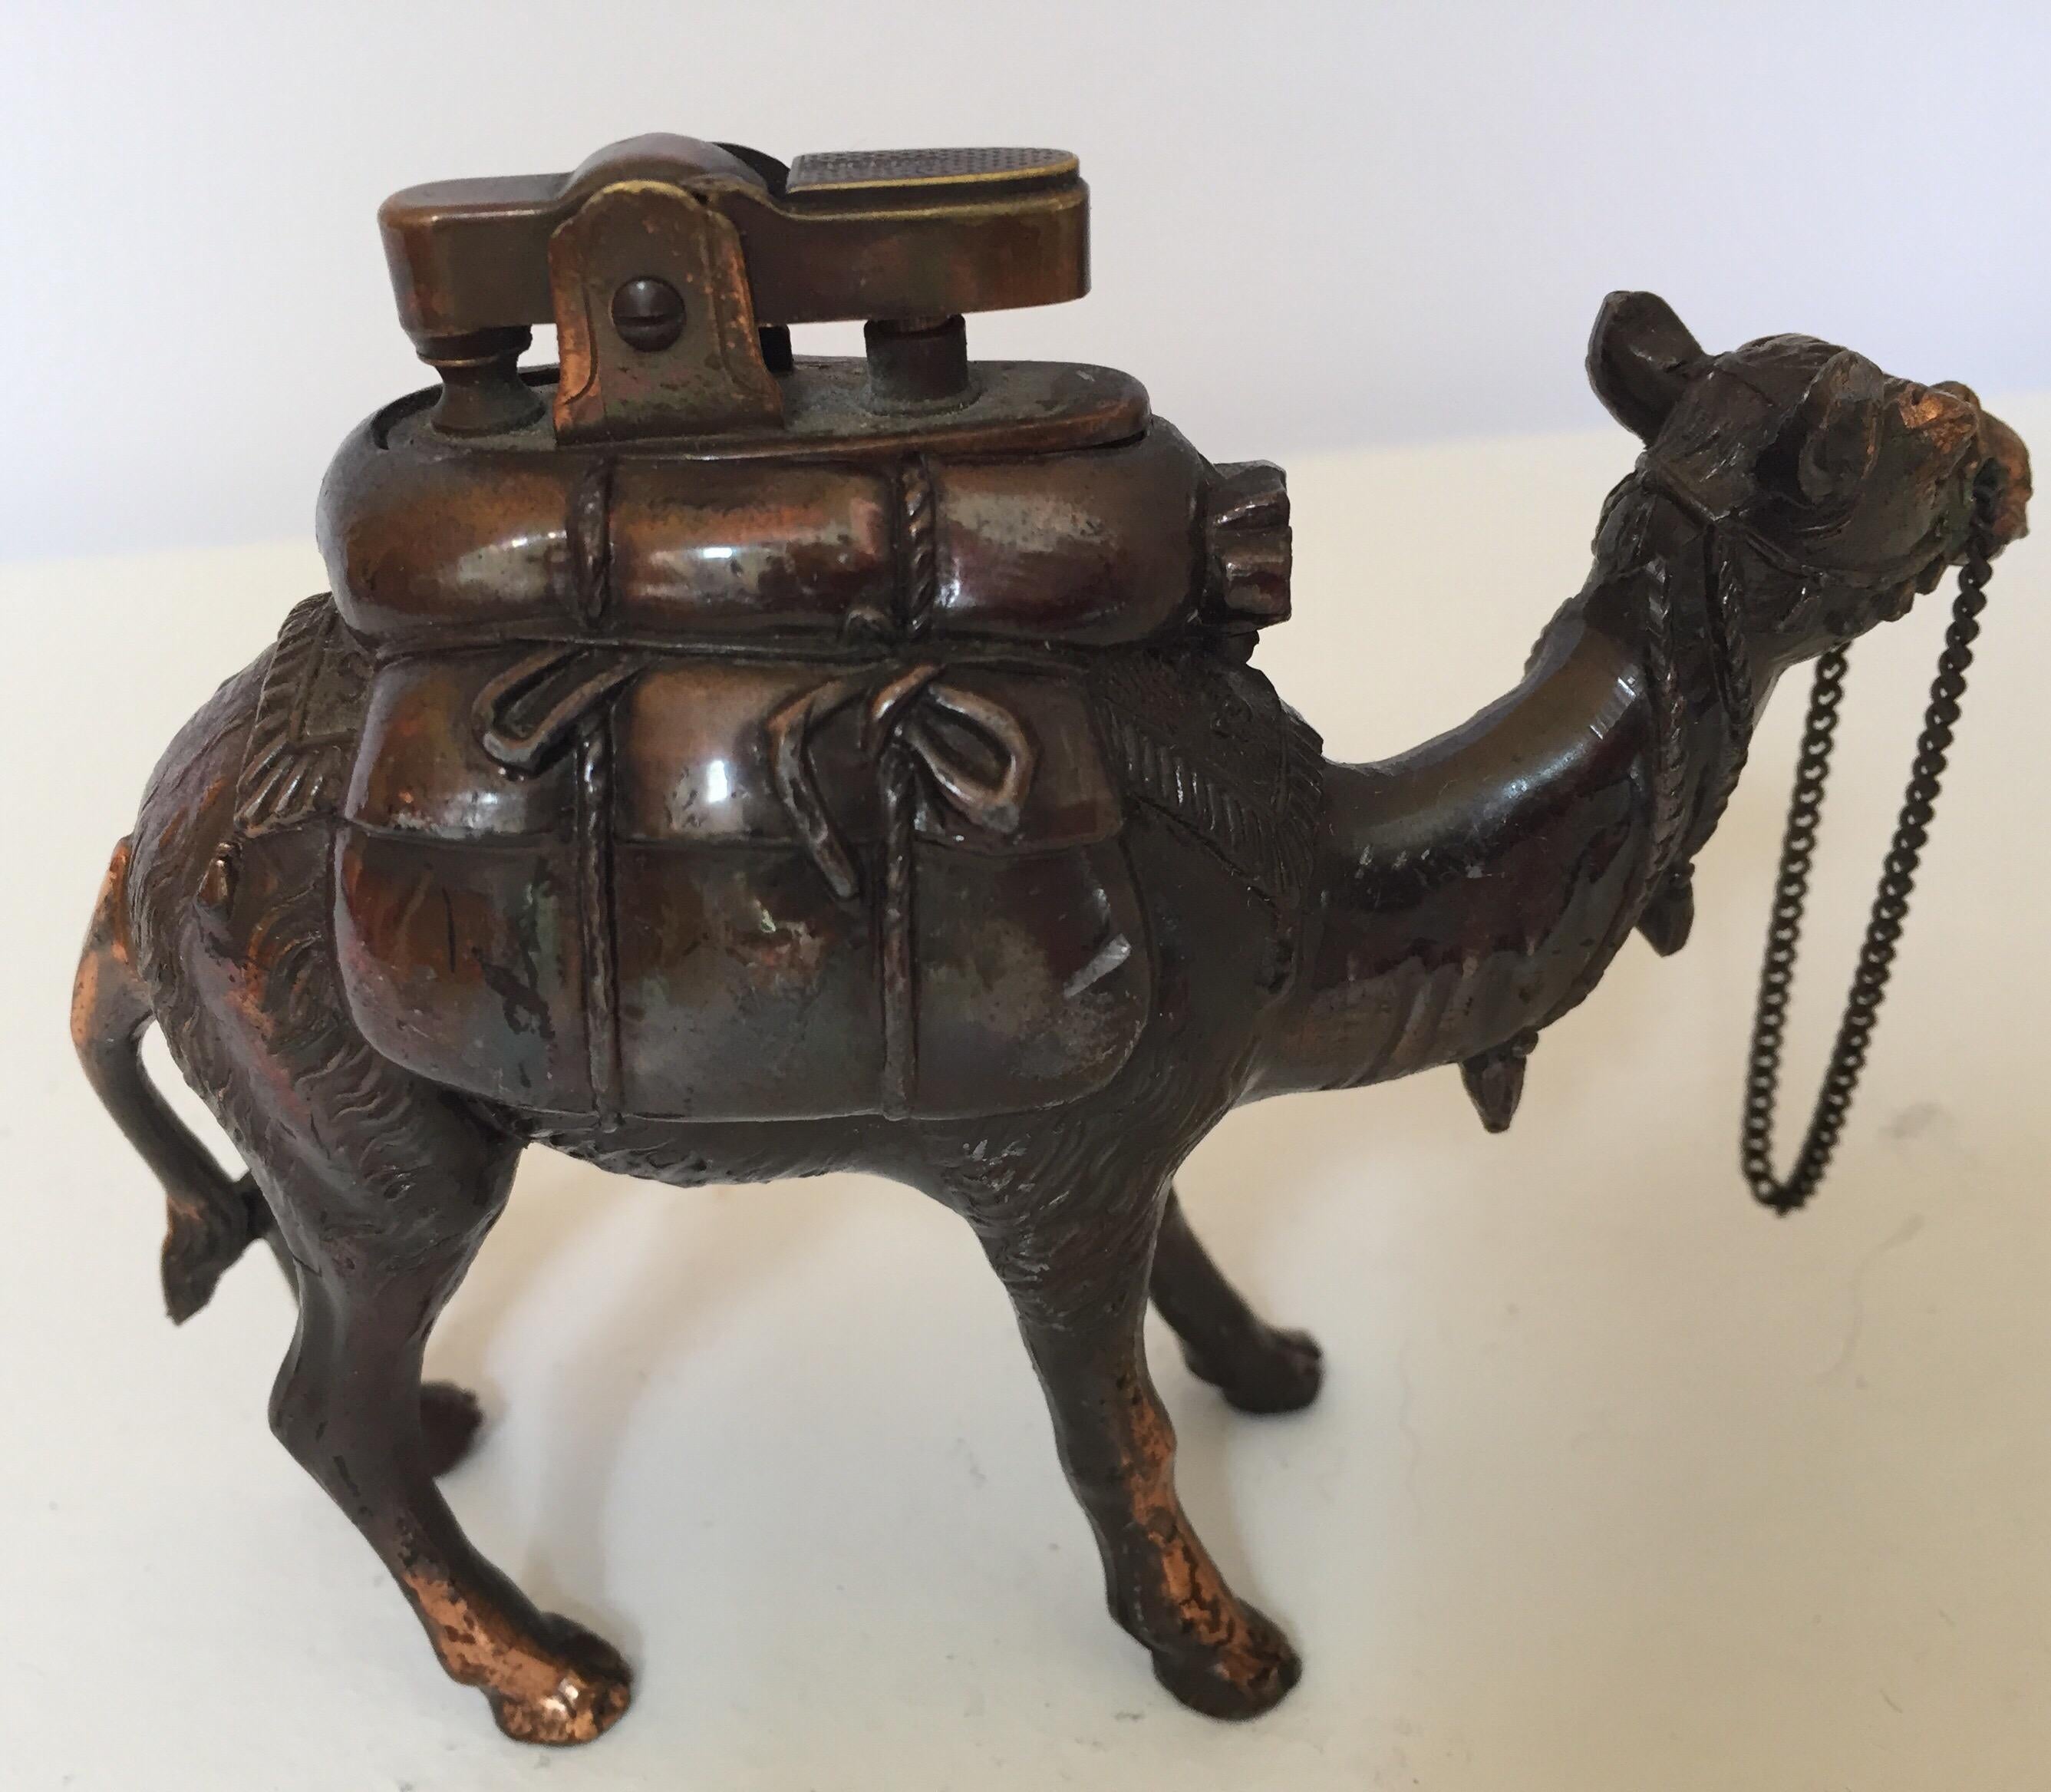 Vintage figure of a standing camel metal table lighter,
Cast metal brass camel figure in walking position with its head facing forwards carrying packs. 
Copper bronzed color like patina finish.
 